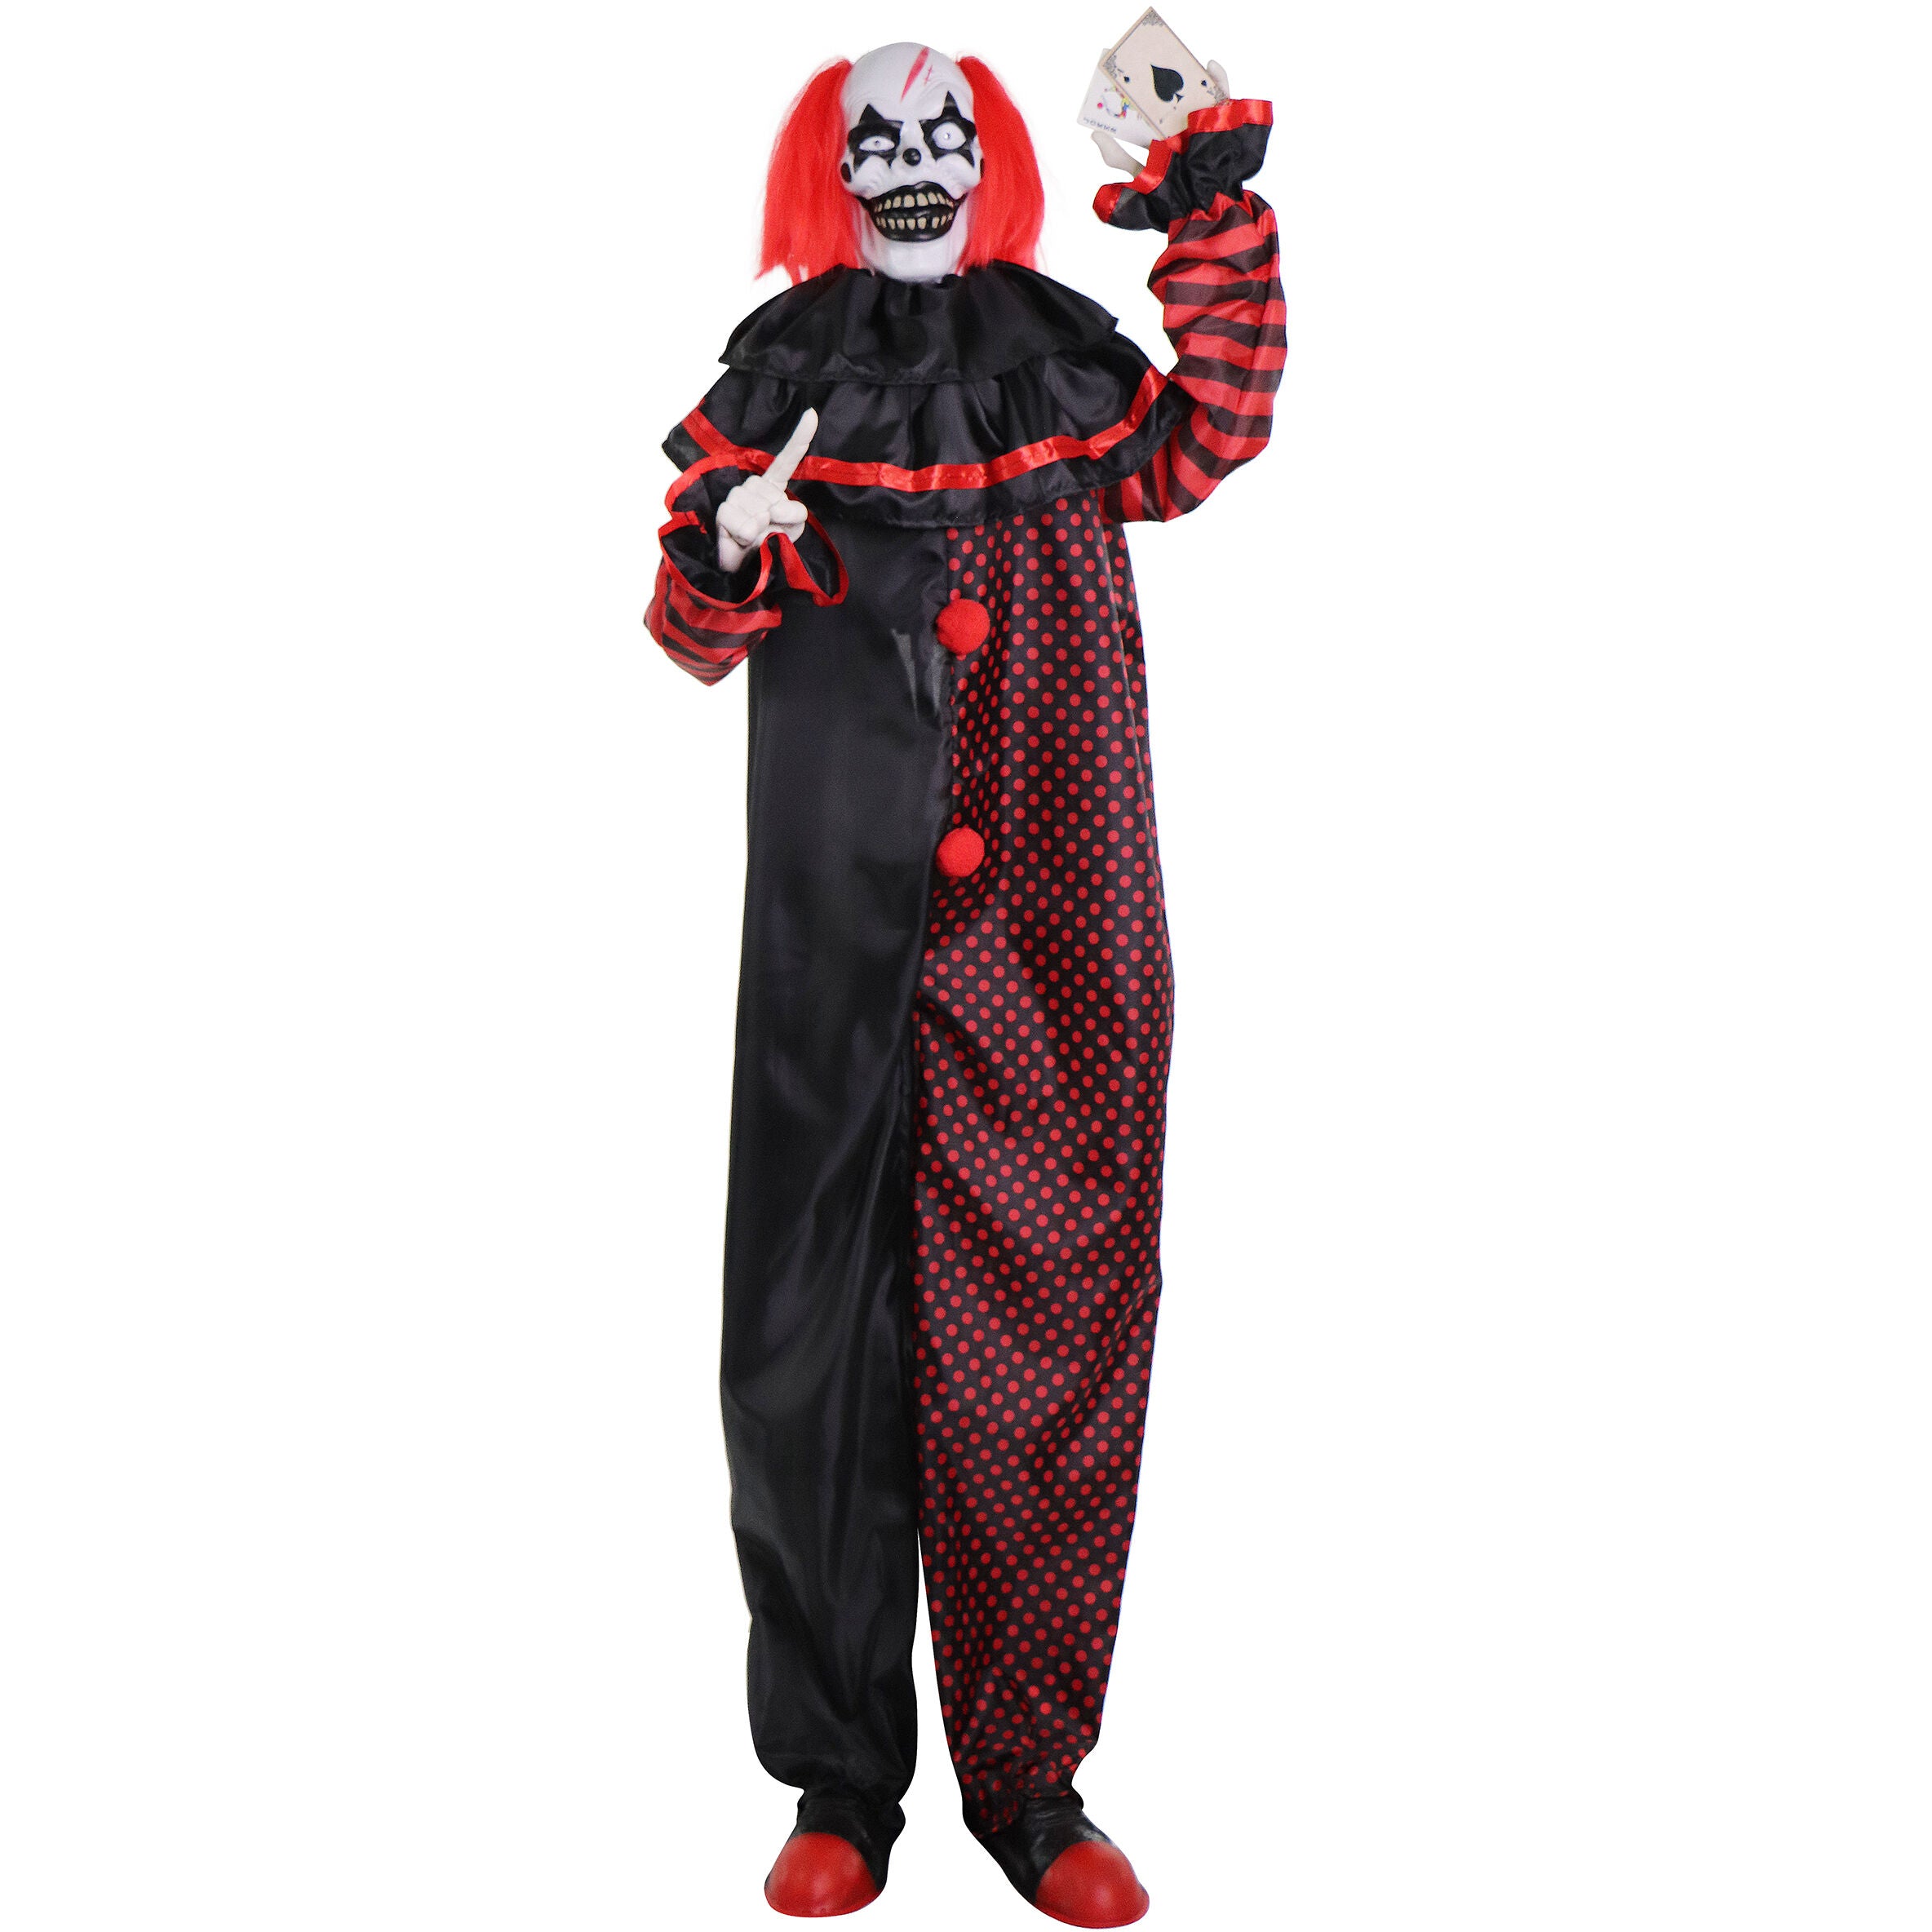 Haunted Hill Farm - Animatronic Pop-Up Two-Headed Clown with Light-Up Eyes for Scary Halloween Decoration